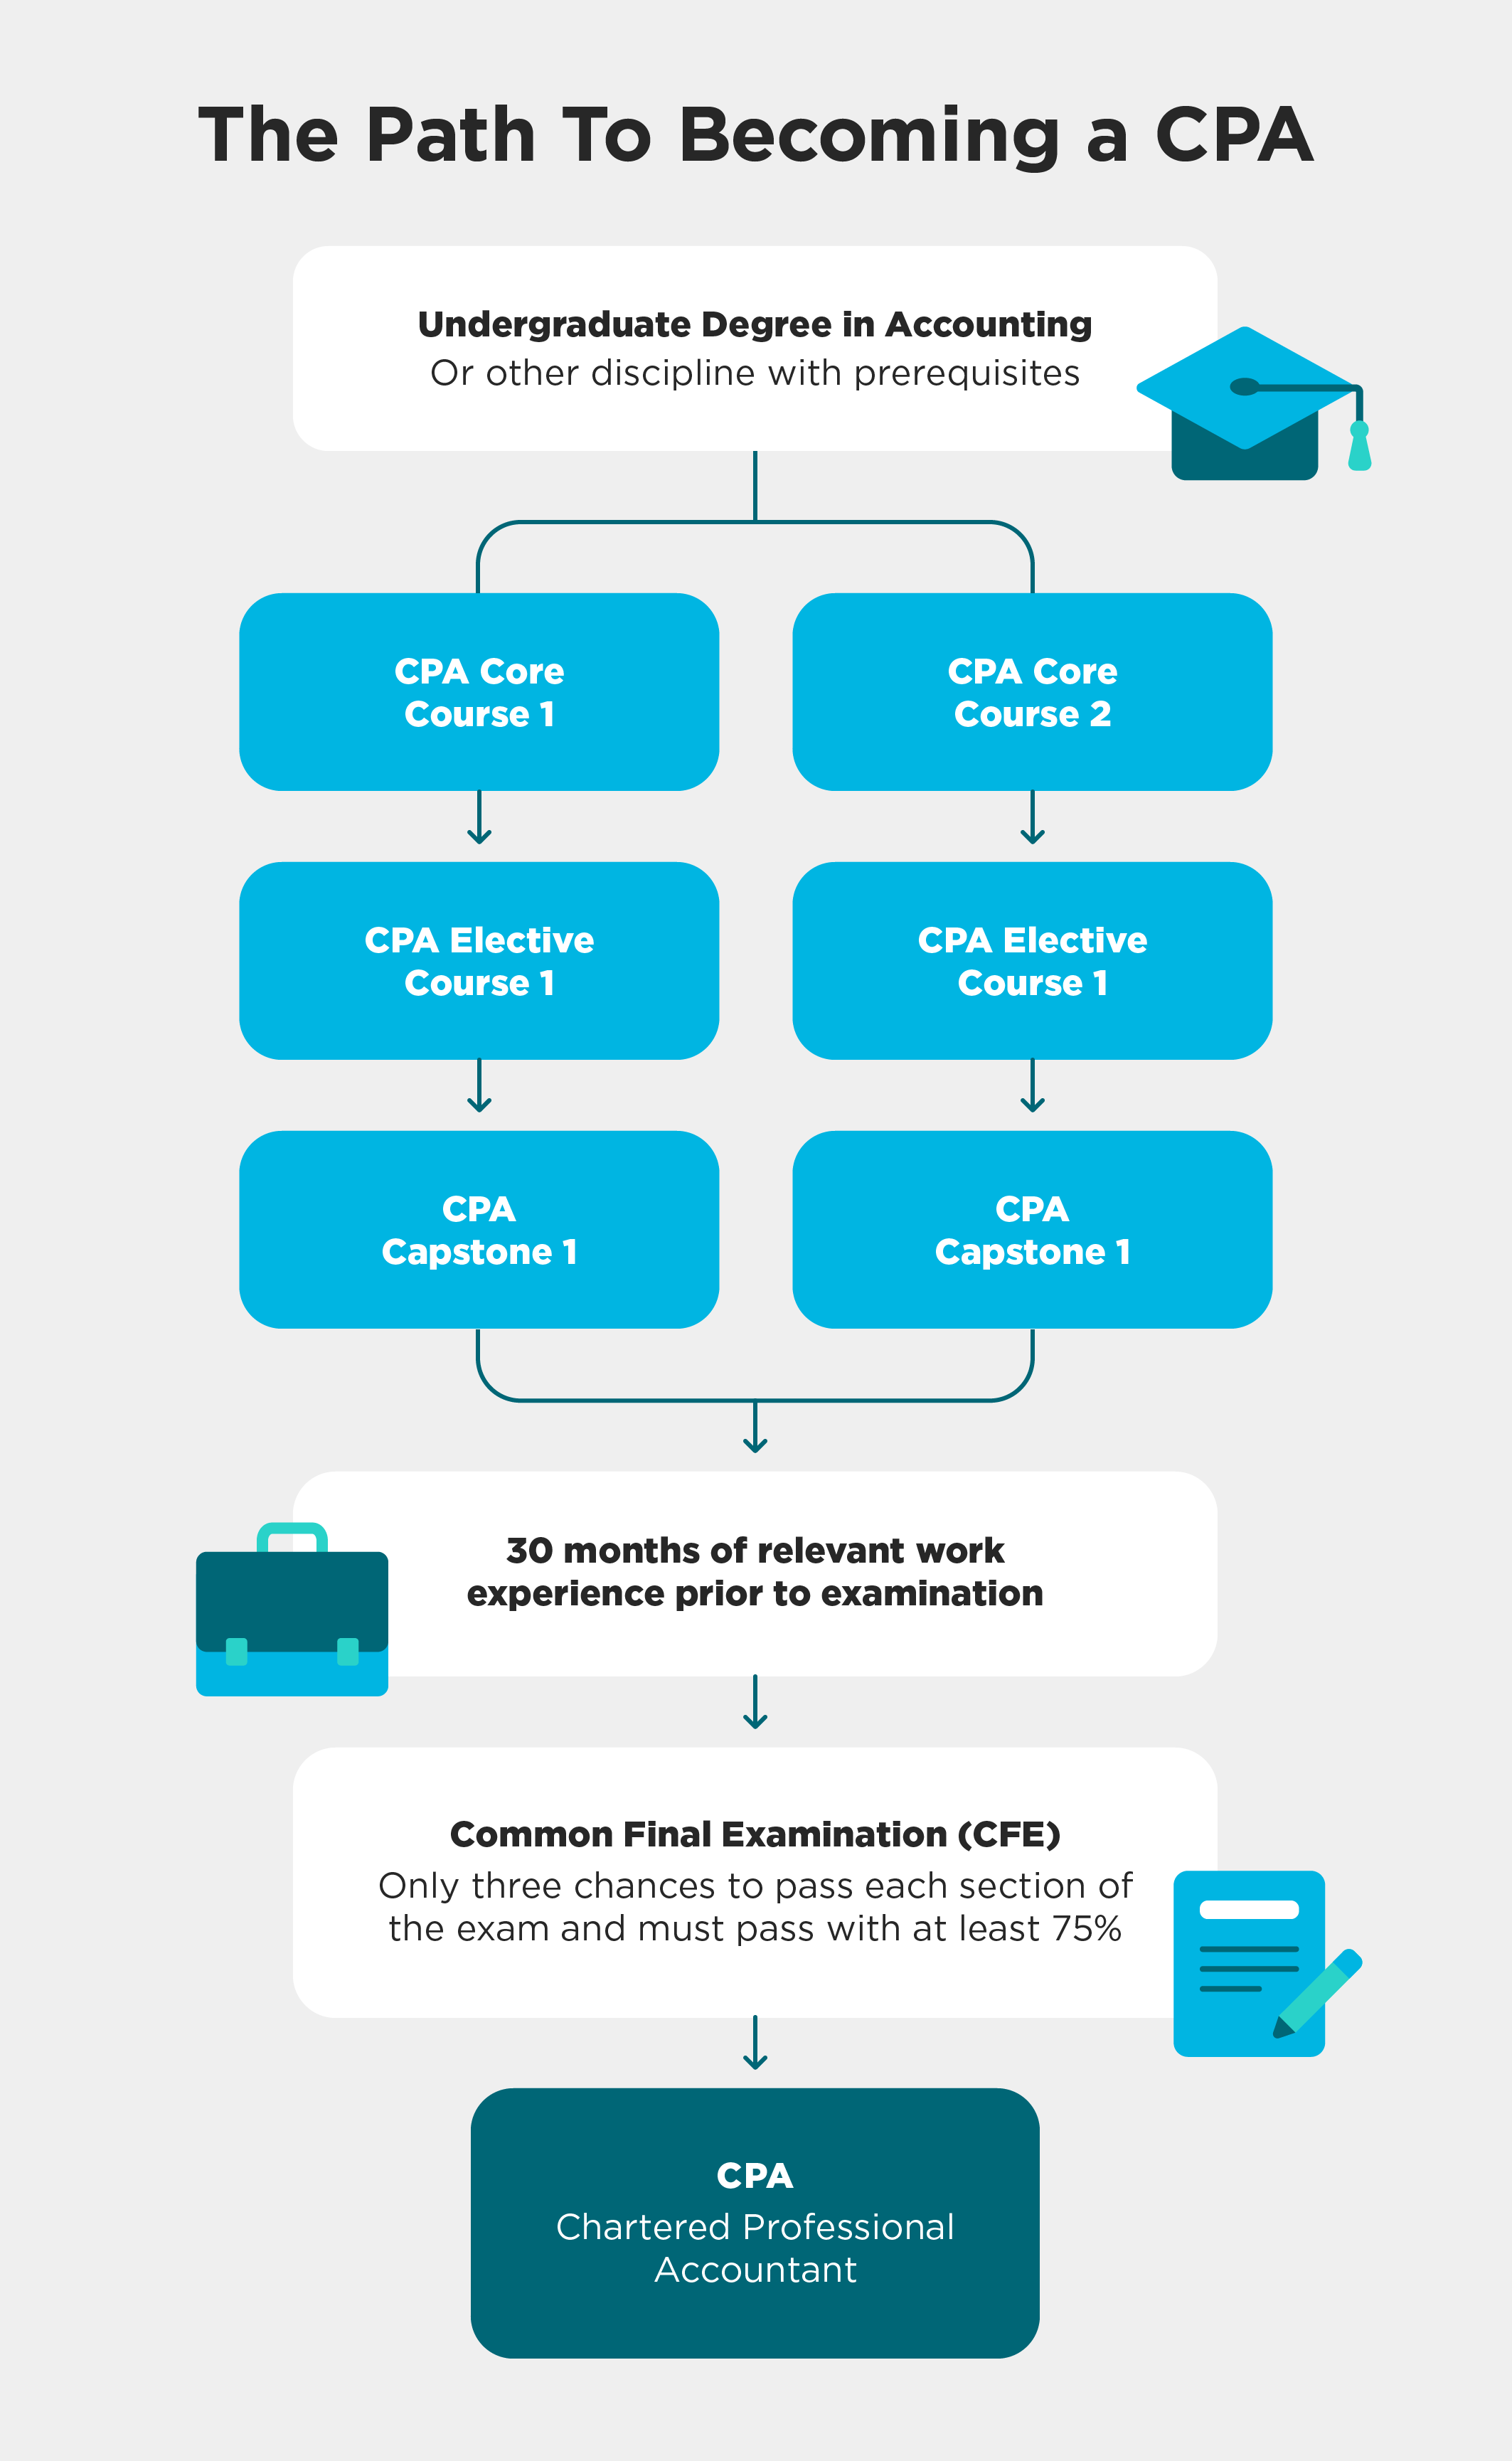 Flow chart depicting the path to becoming a CPA